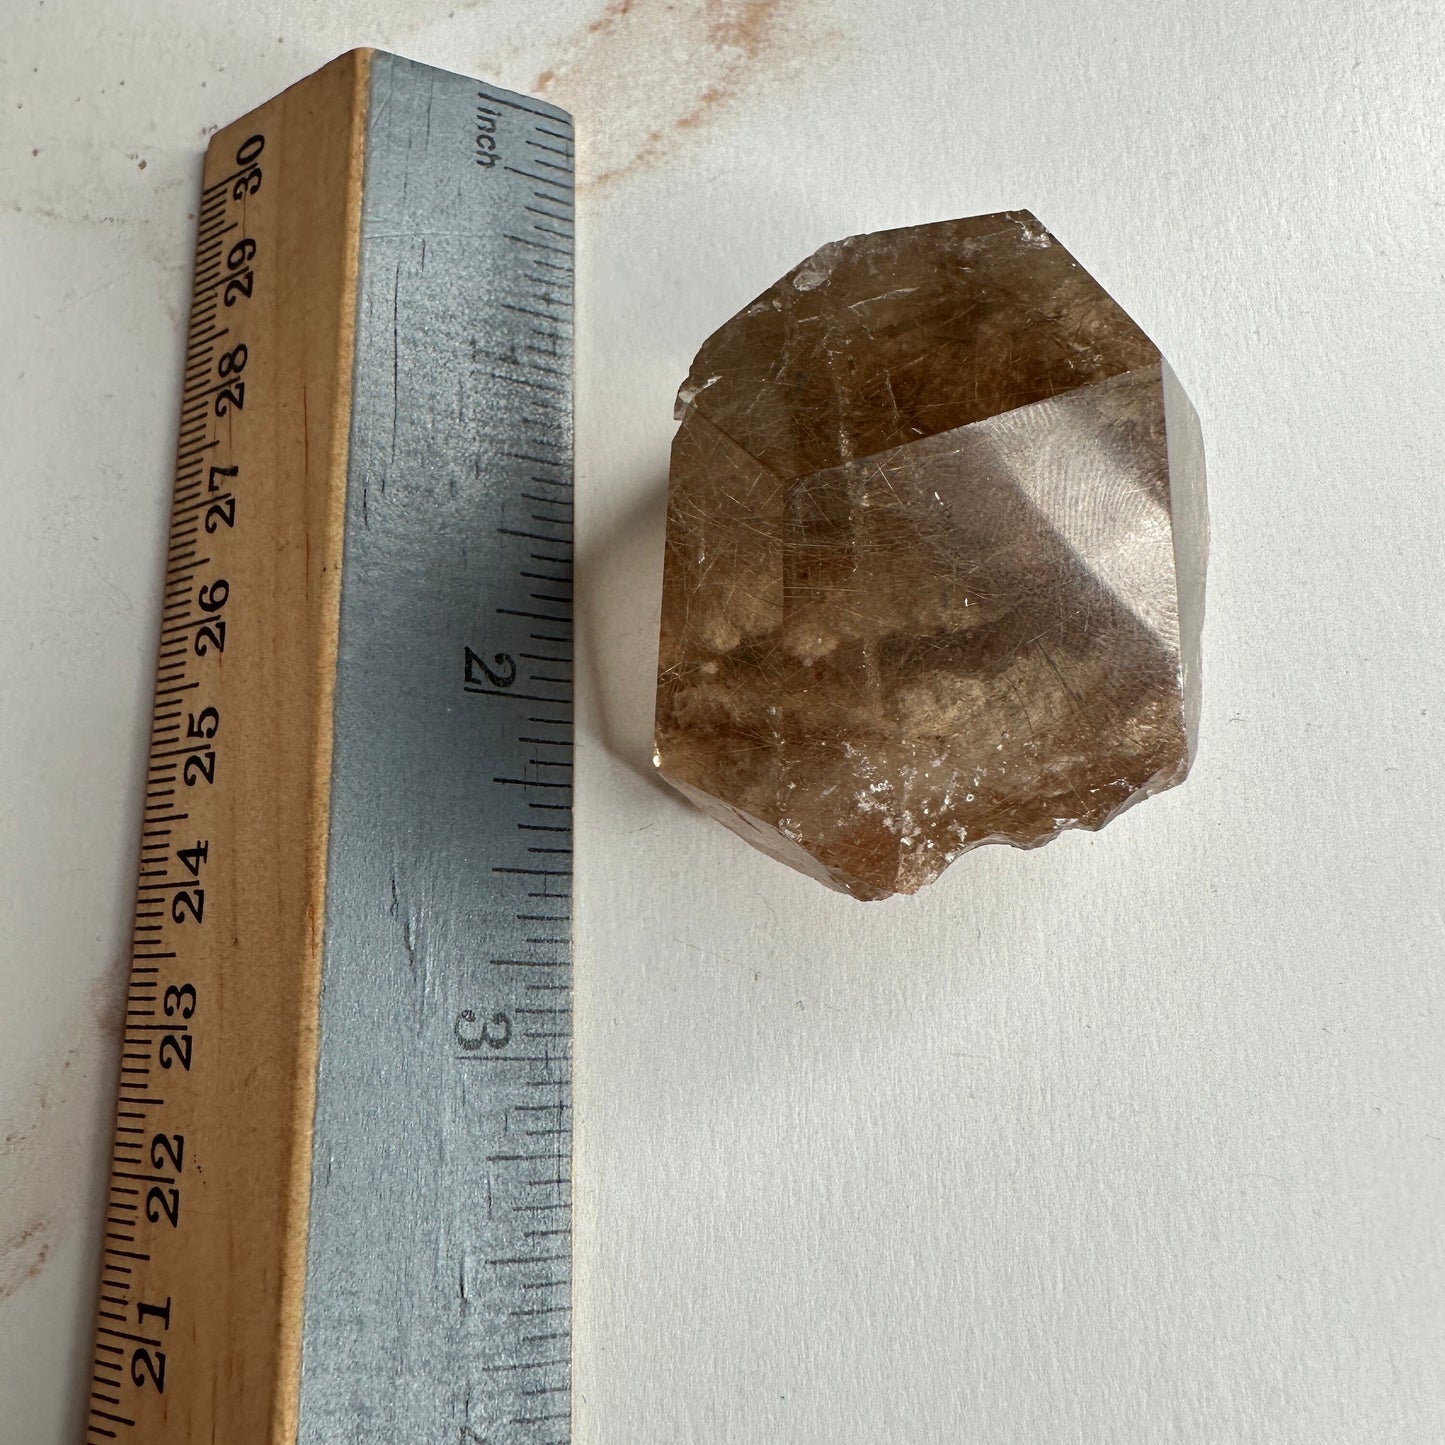 Captivating Rutile Smoky Quartz Freeform Point With Garden Inclusions From Brazil